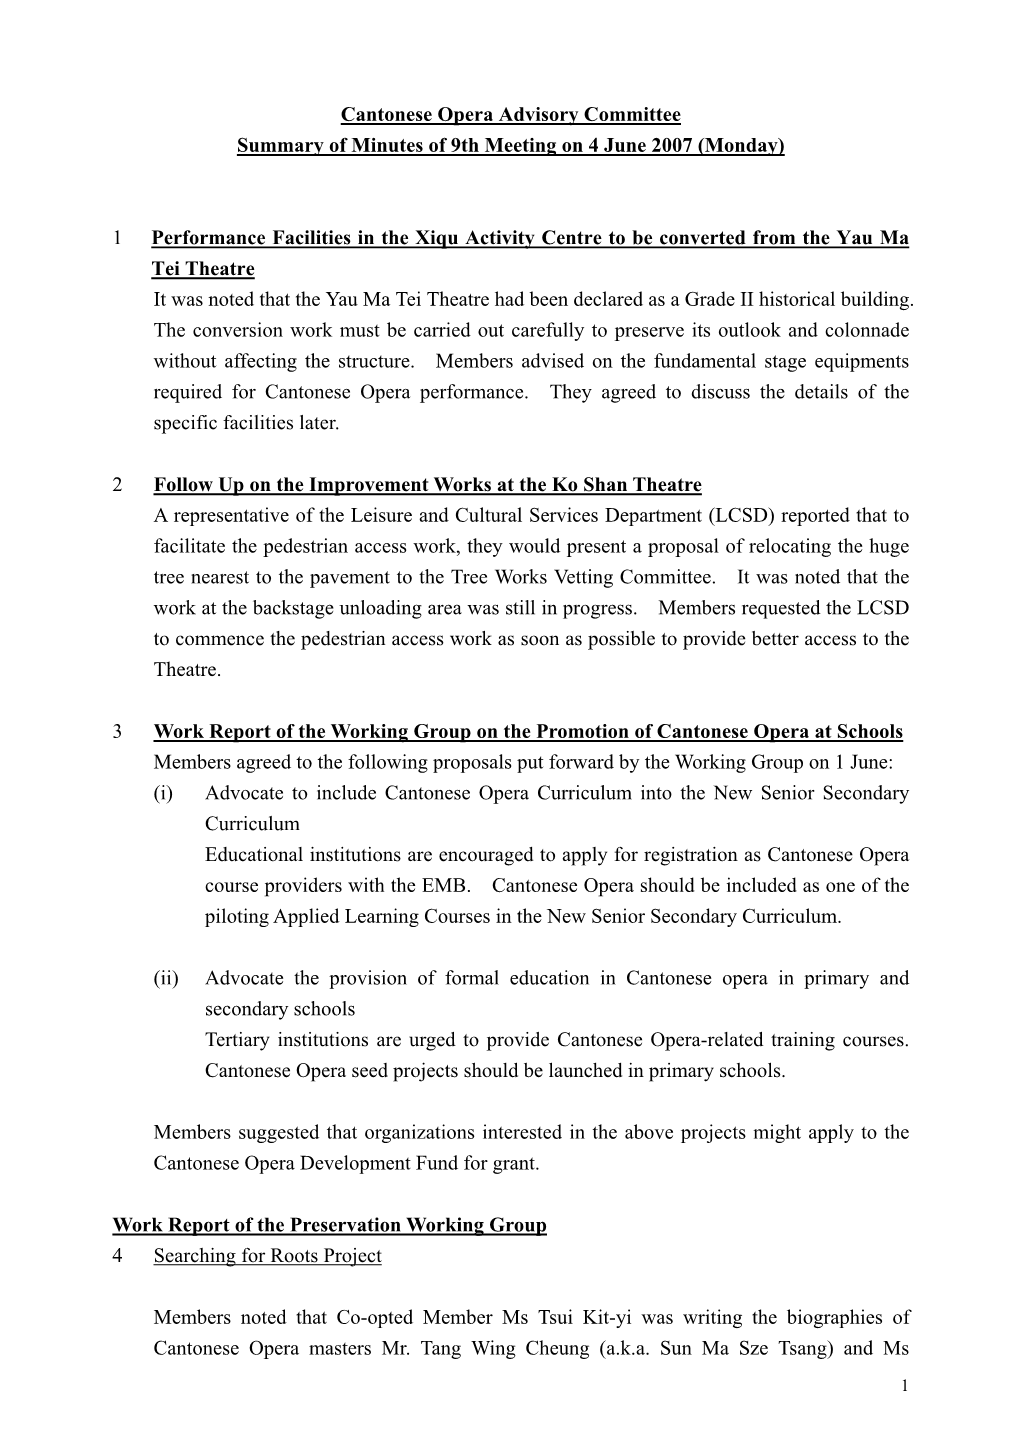 Summary of Minutes of 9Th Meeting on 4 June 2007 (Monday)